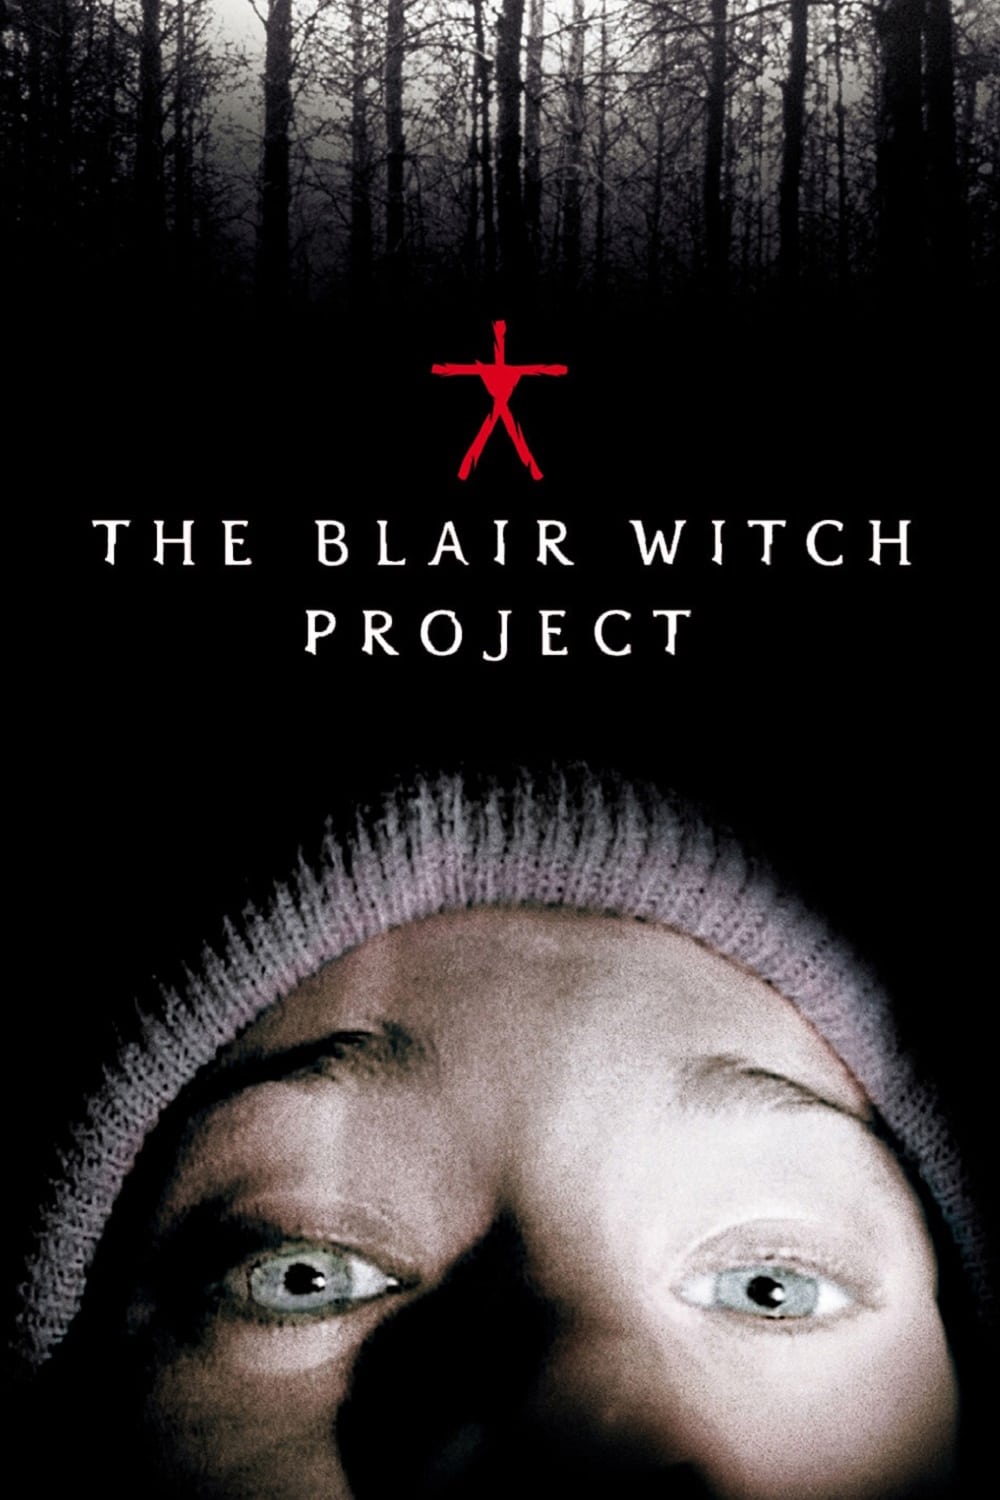 Blair Witch Project (1999)